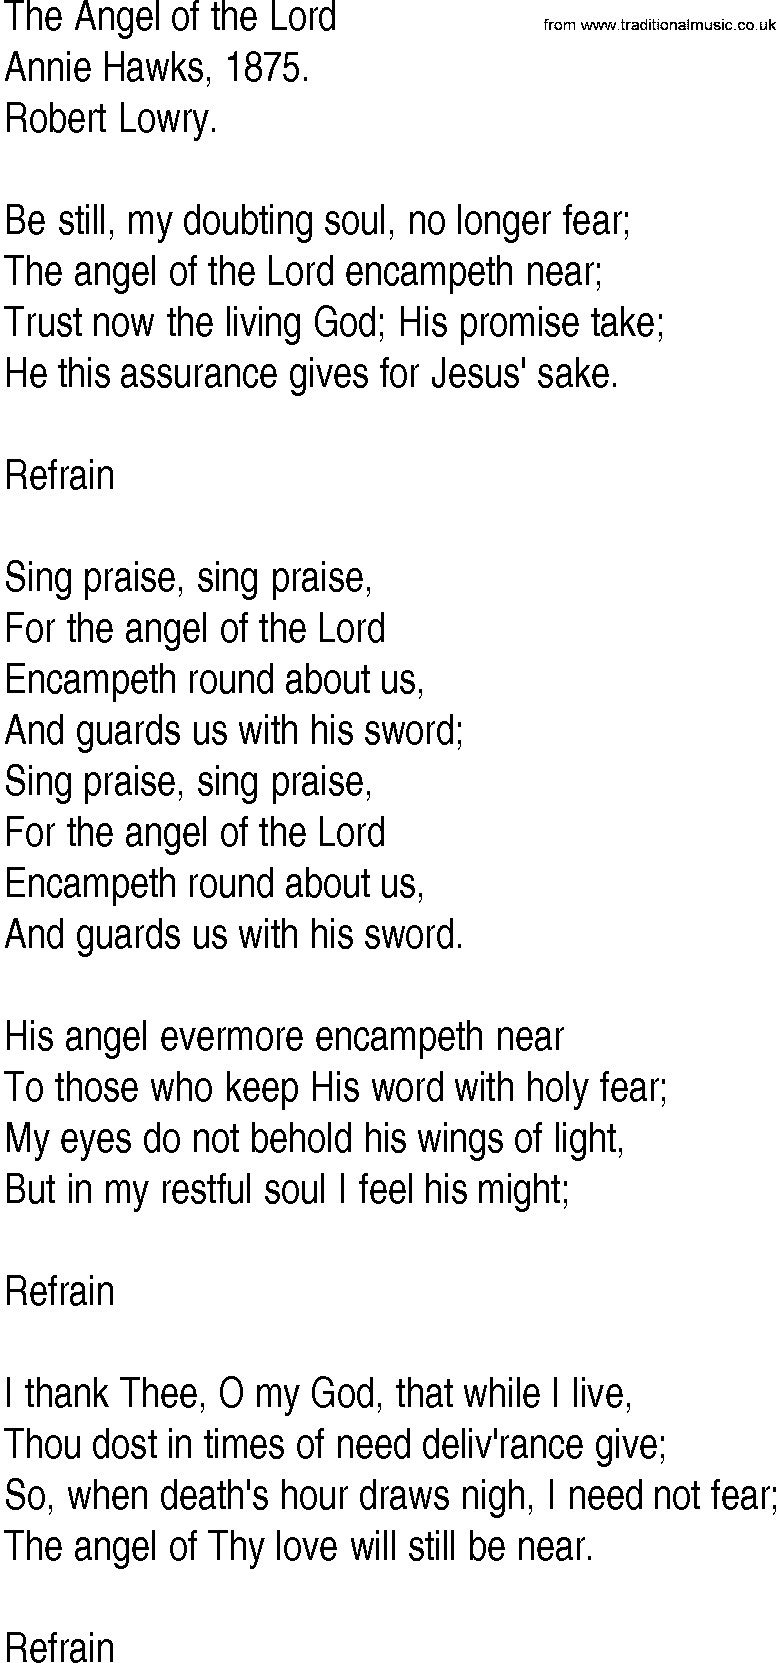 Hymn and Gospel Song: The Angel of the Lord by Annie Hawks lyrics